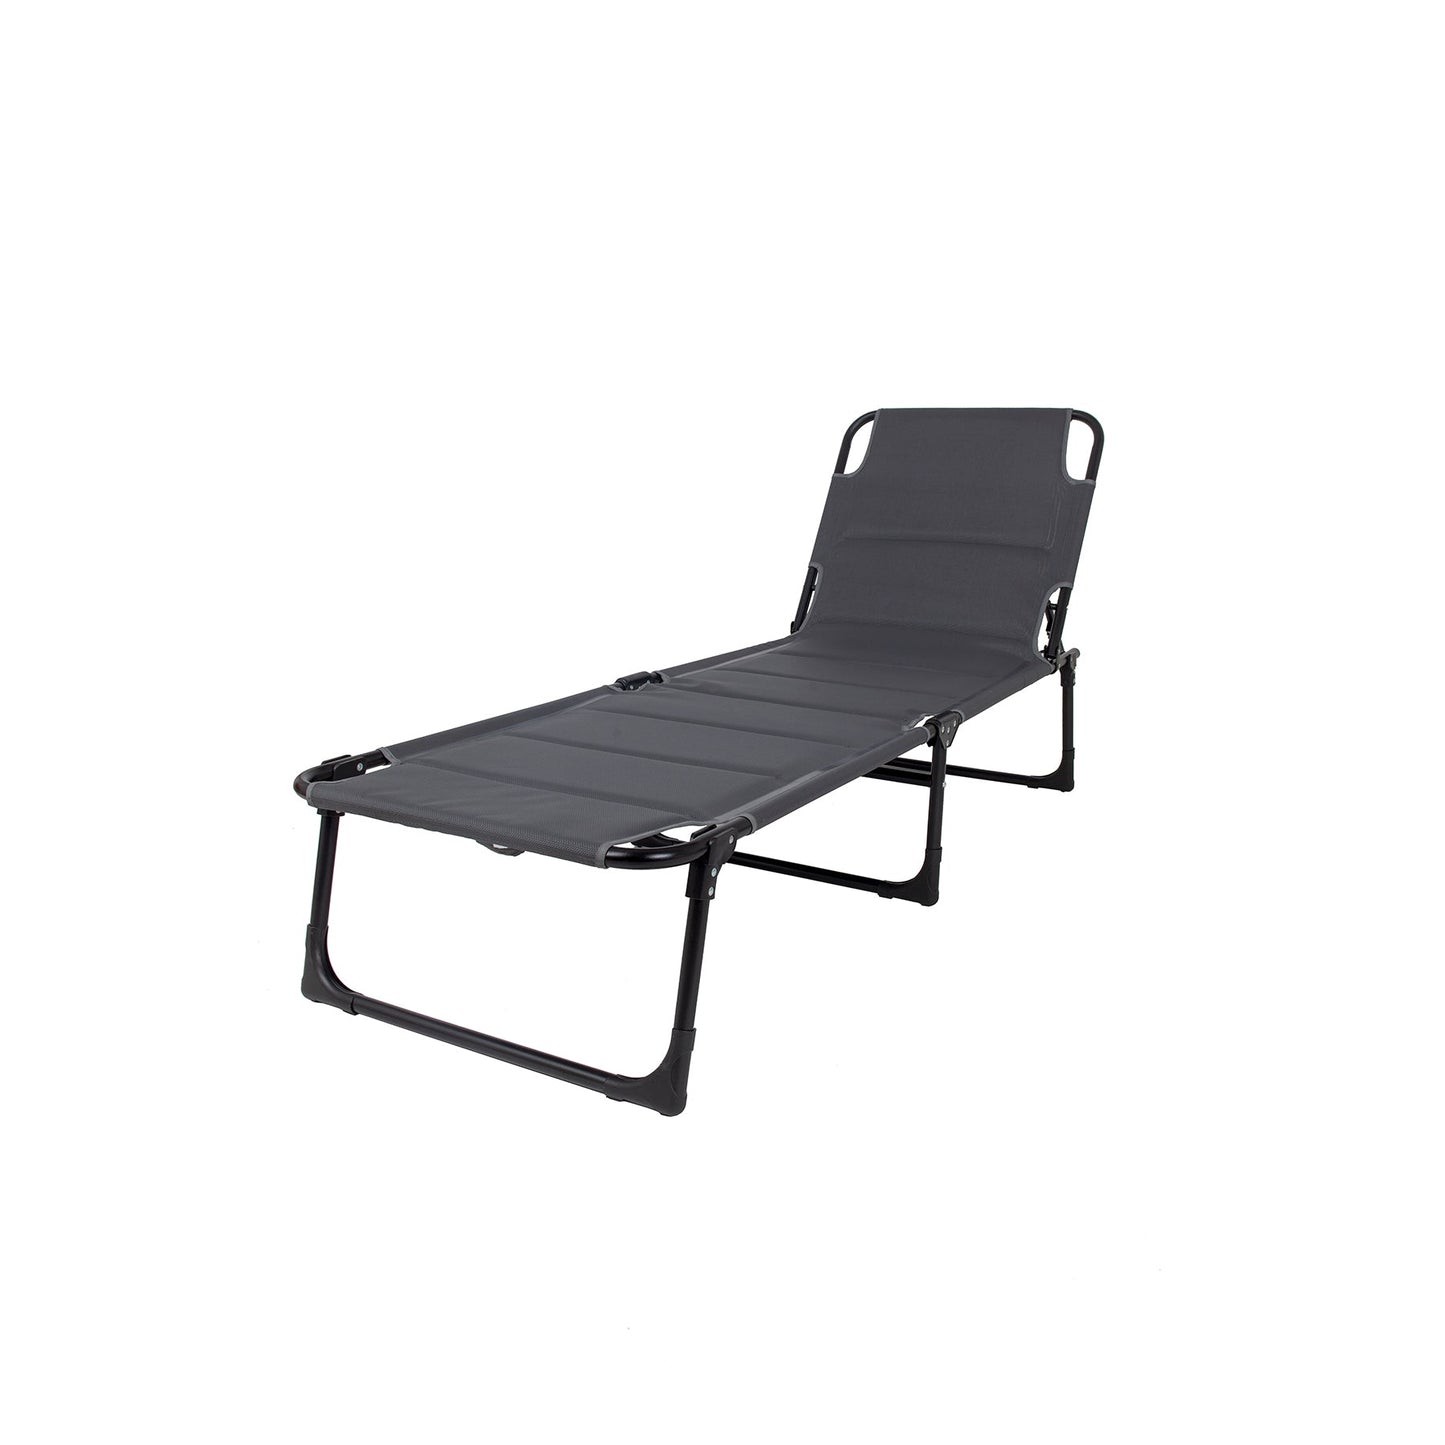 Straame Sunlounger Comfort Chair